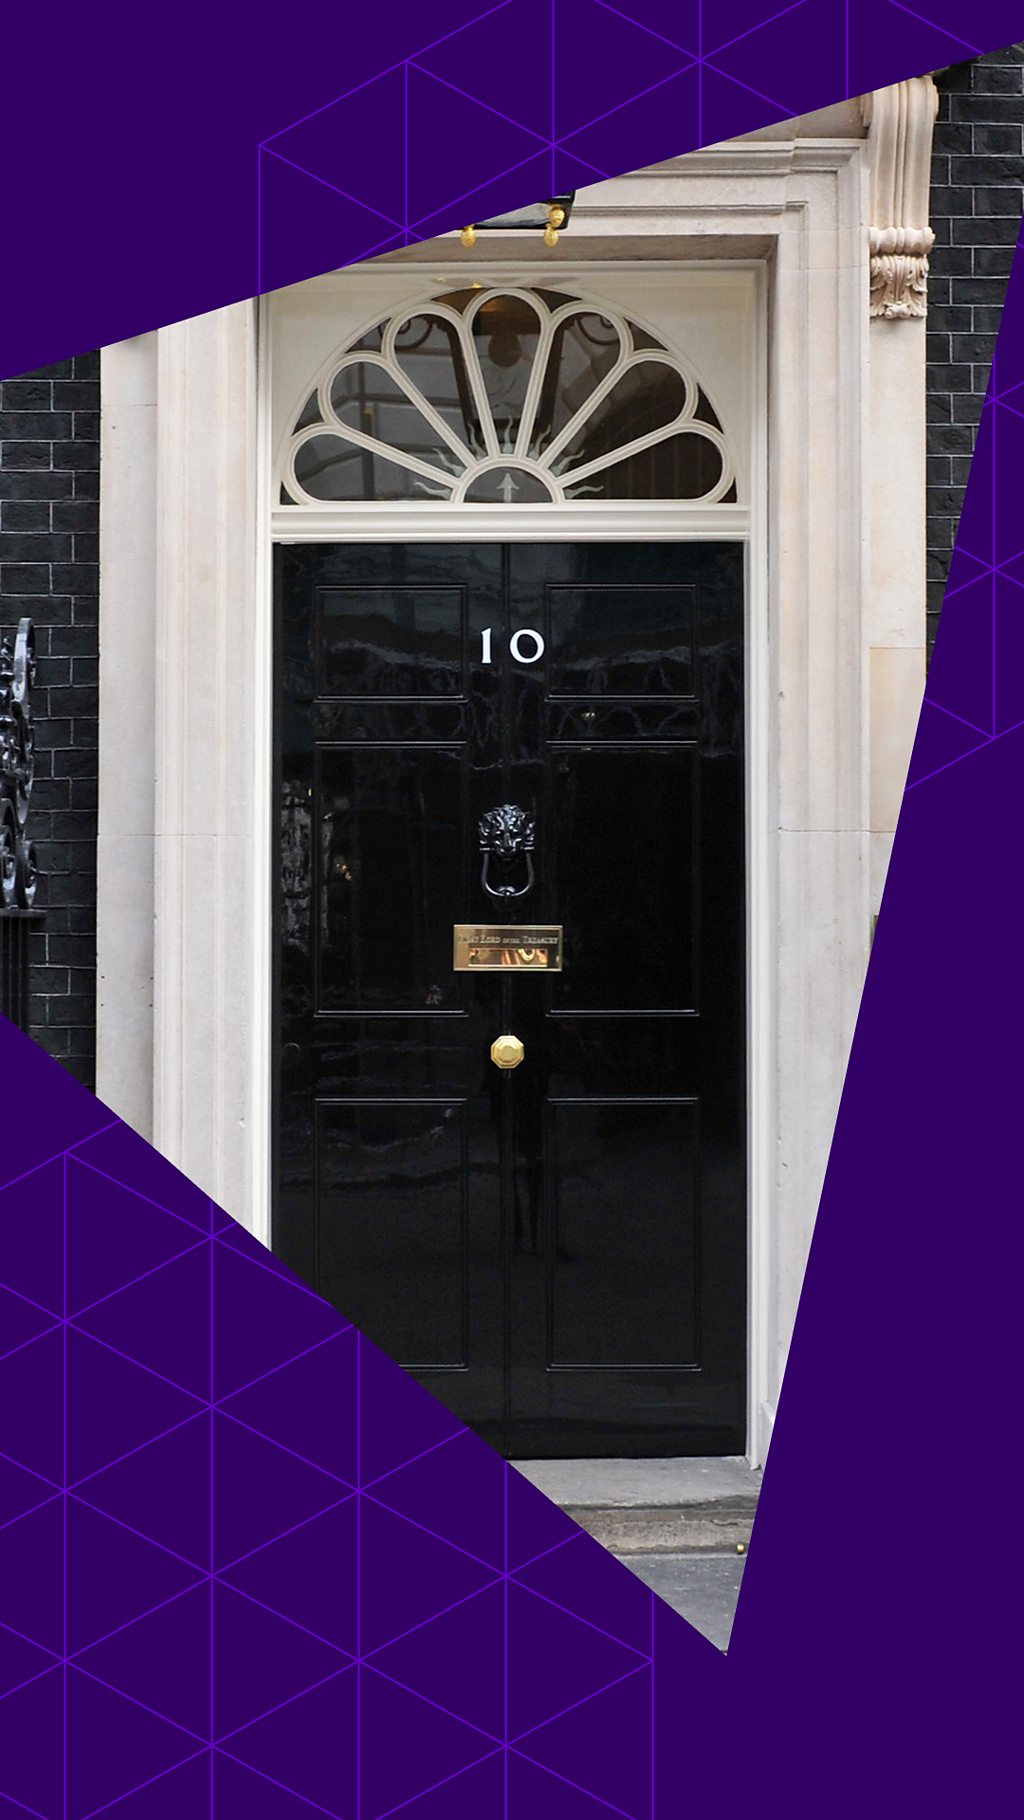 The 10 Downing Street door with a purple triangle graphic on top